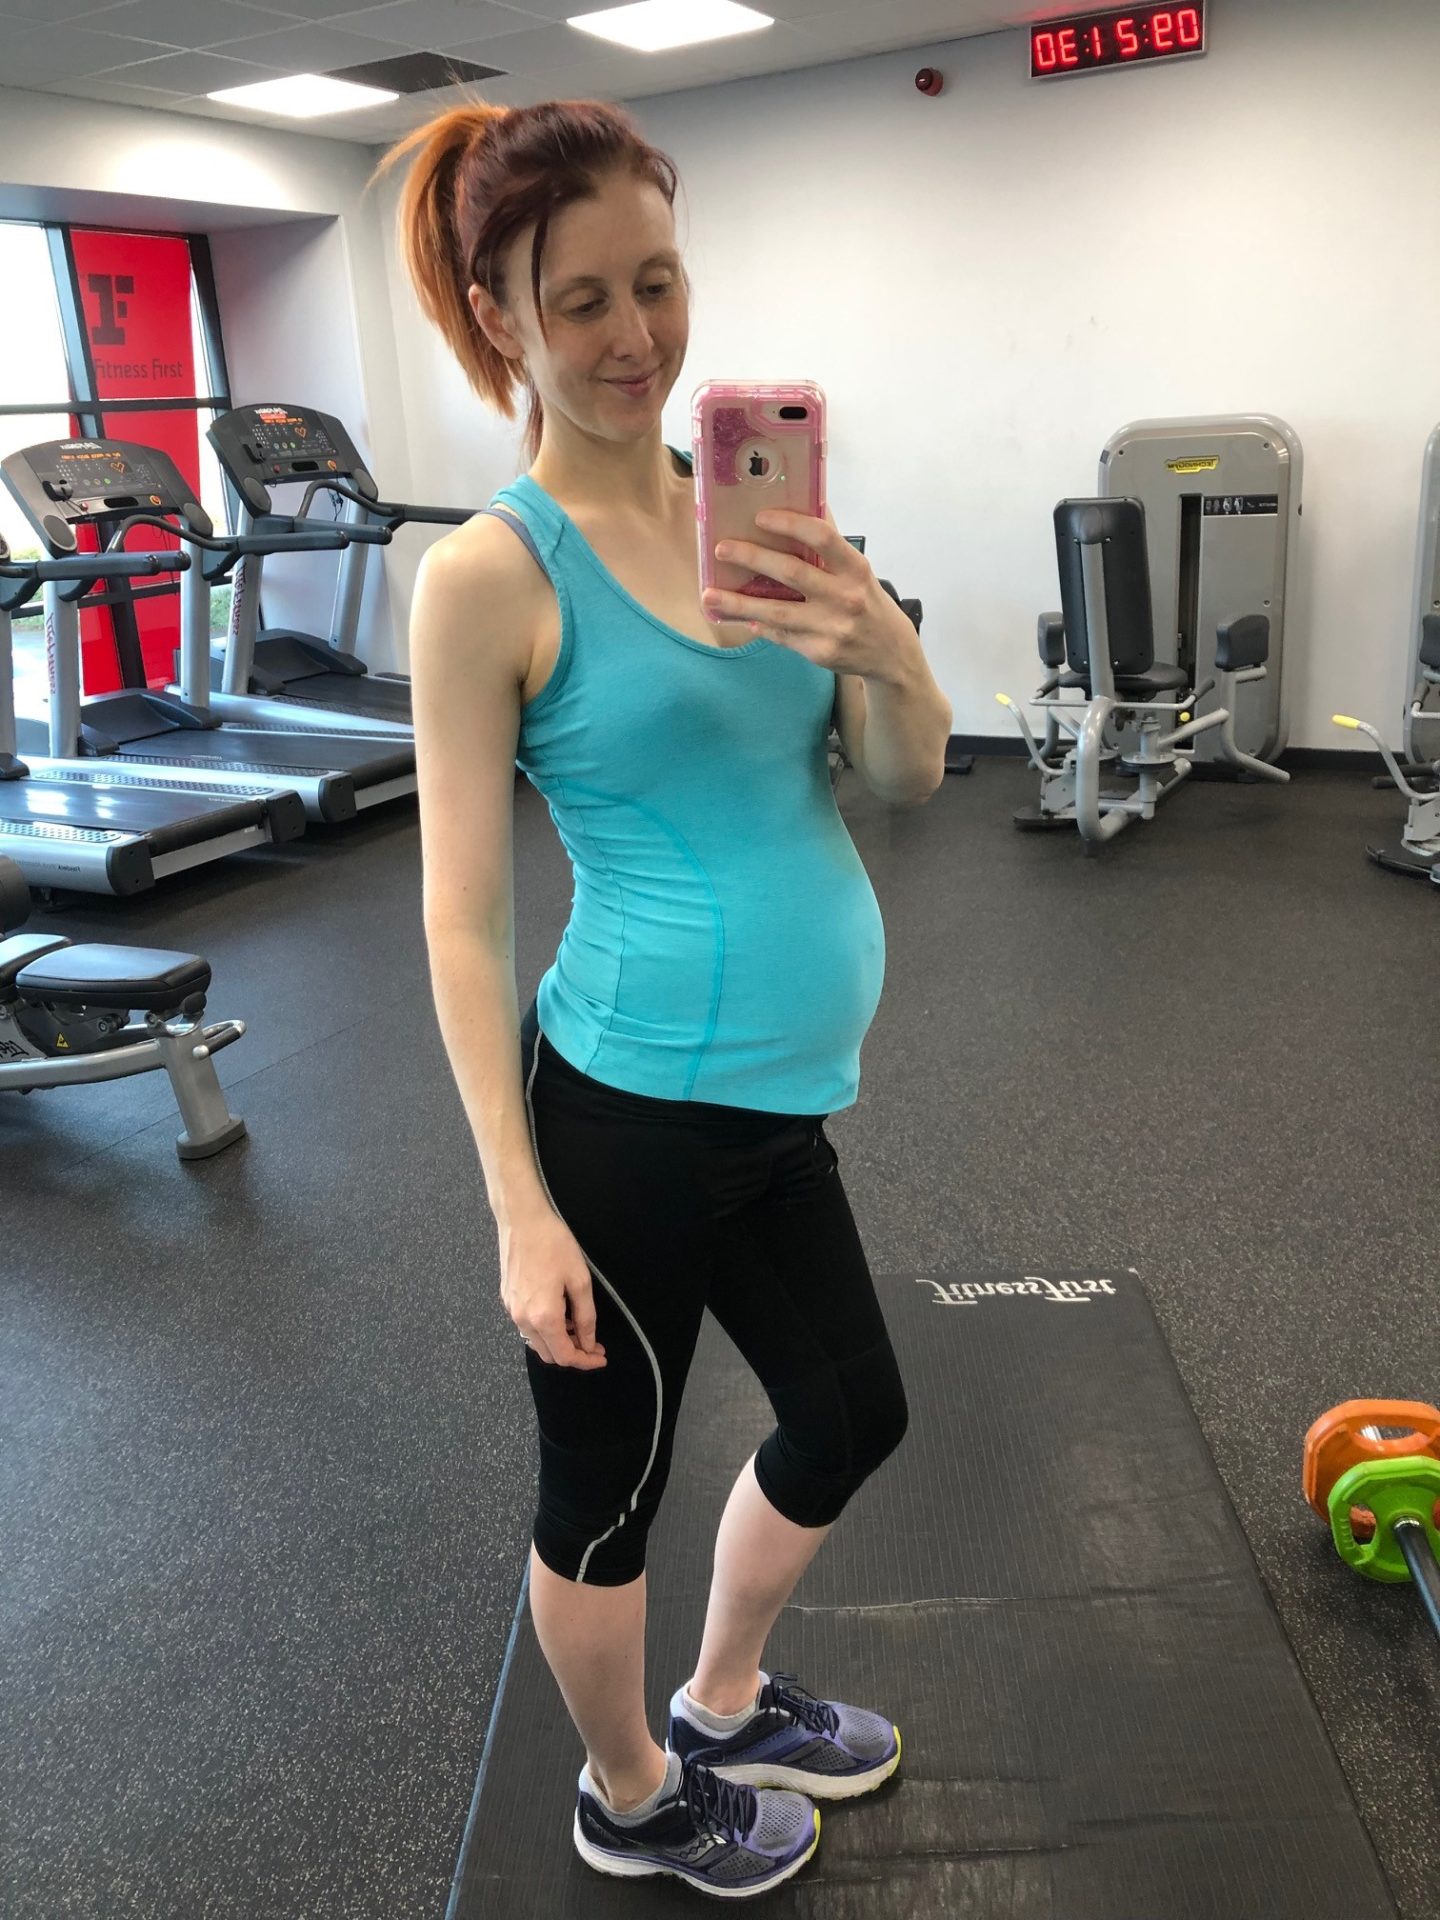 32 weeks pregnant girl in the gym